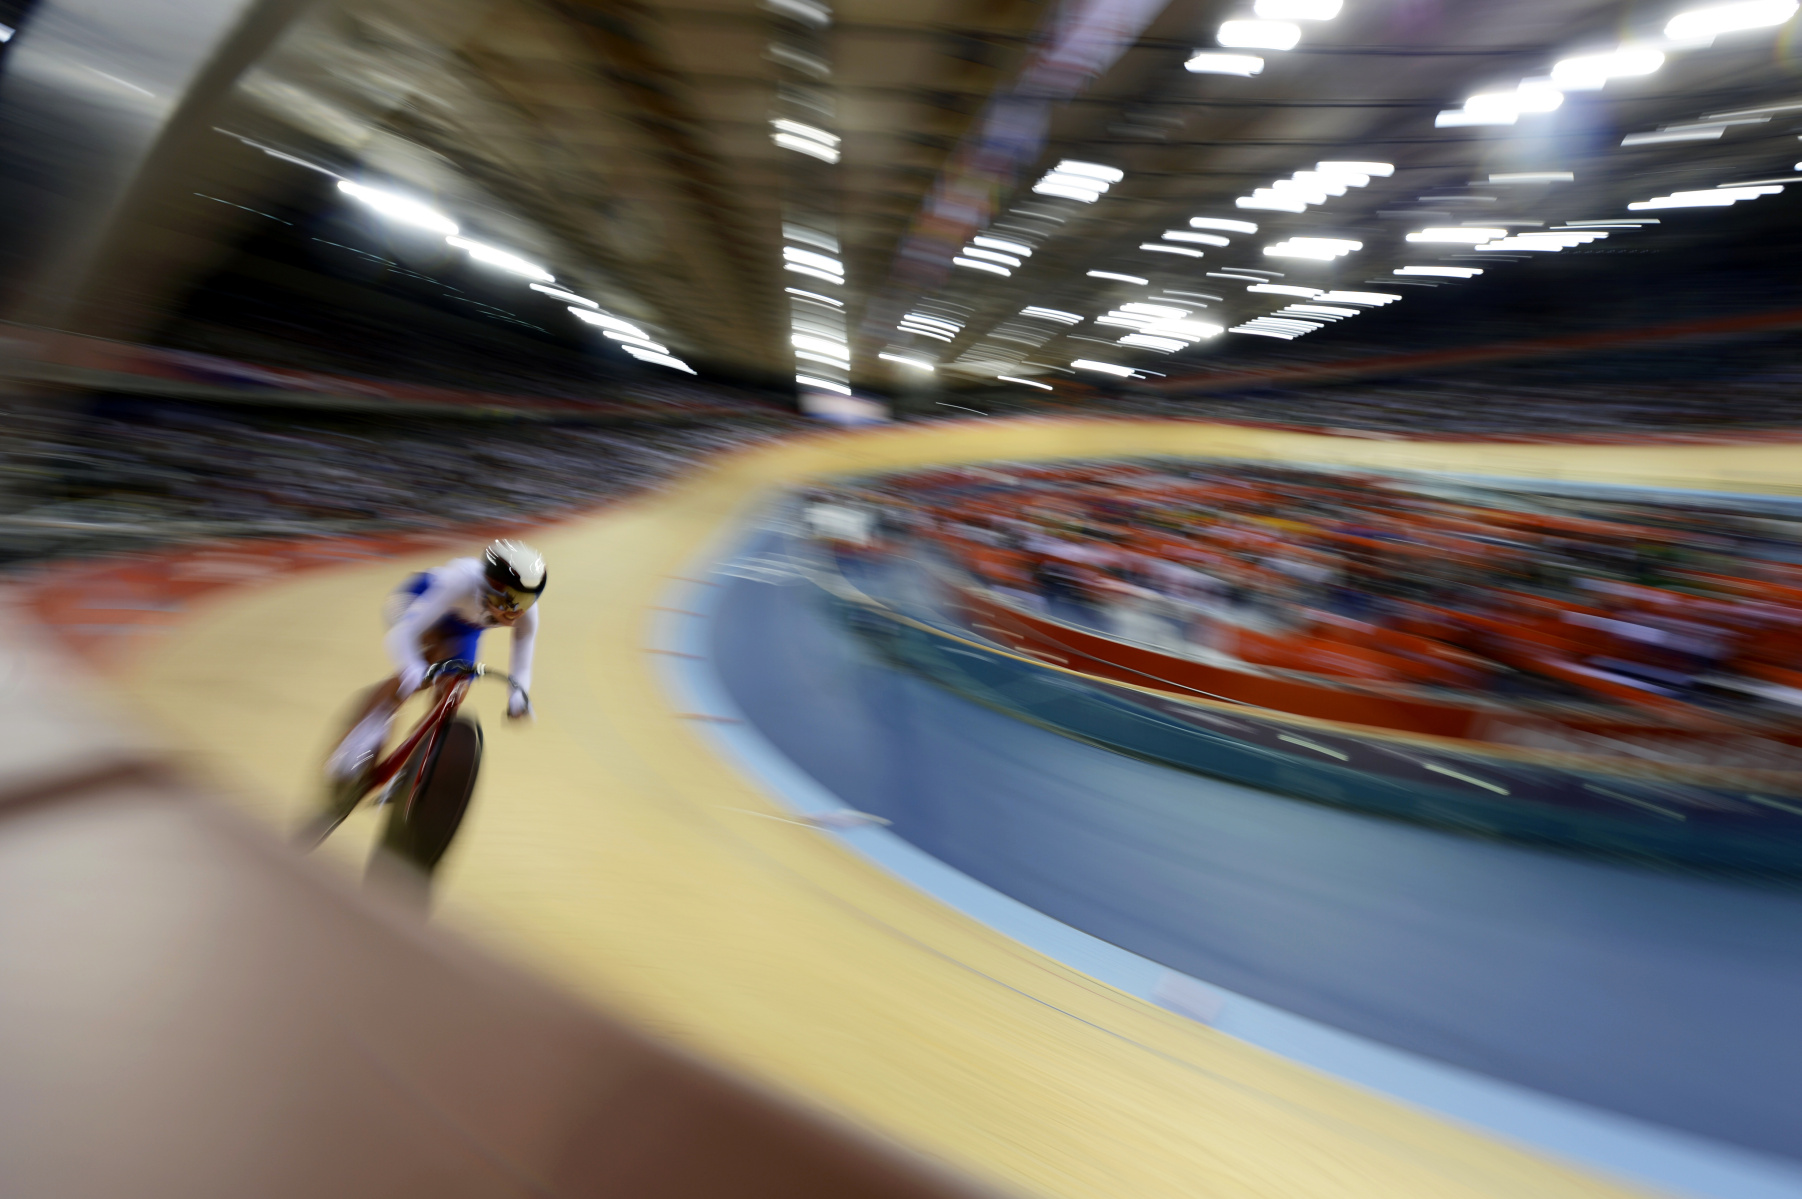 Women's Omnium at the Velodrome. : London Olympics : Photography by Adam Stoltman: Sports Photography, The Arts, Portraiture, Travel, Photojournalism and Fine Art in New York